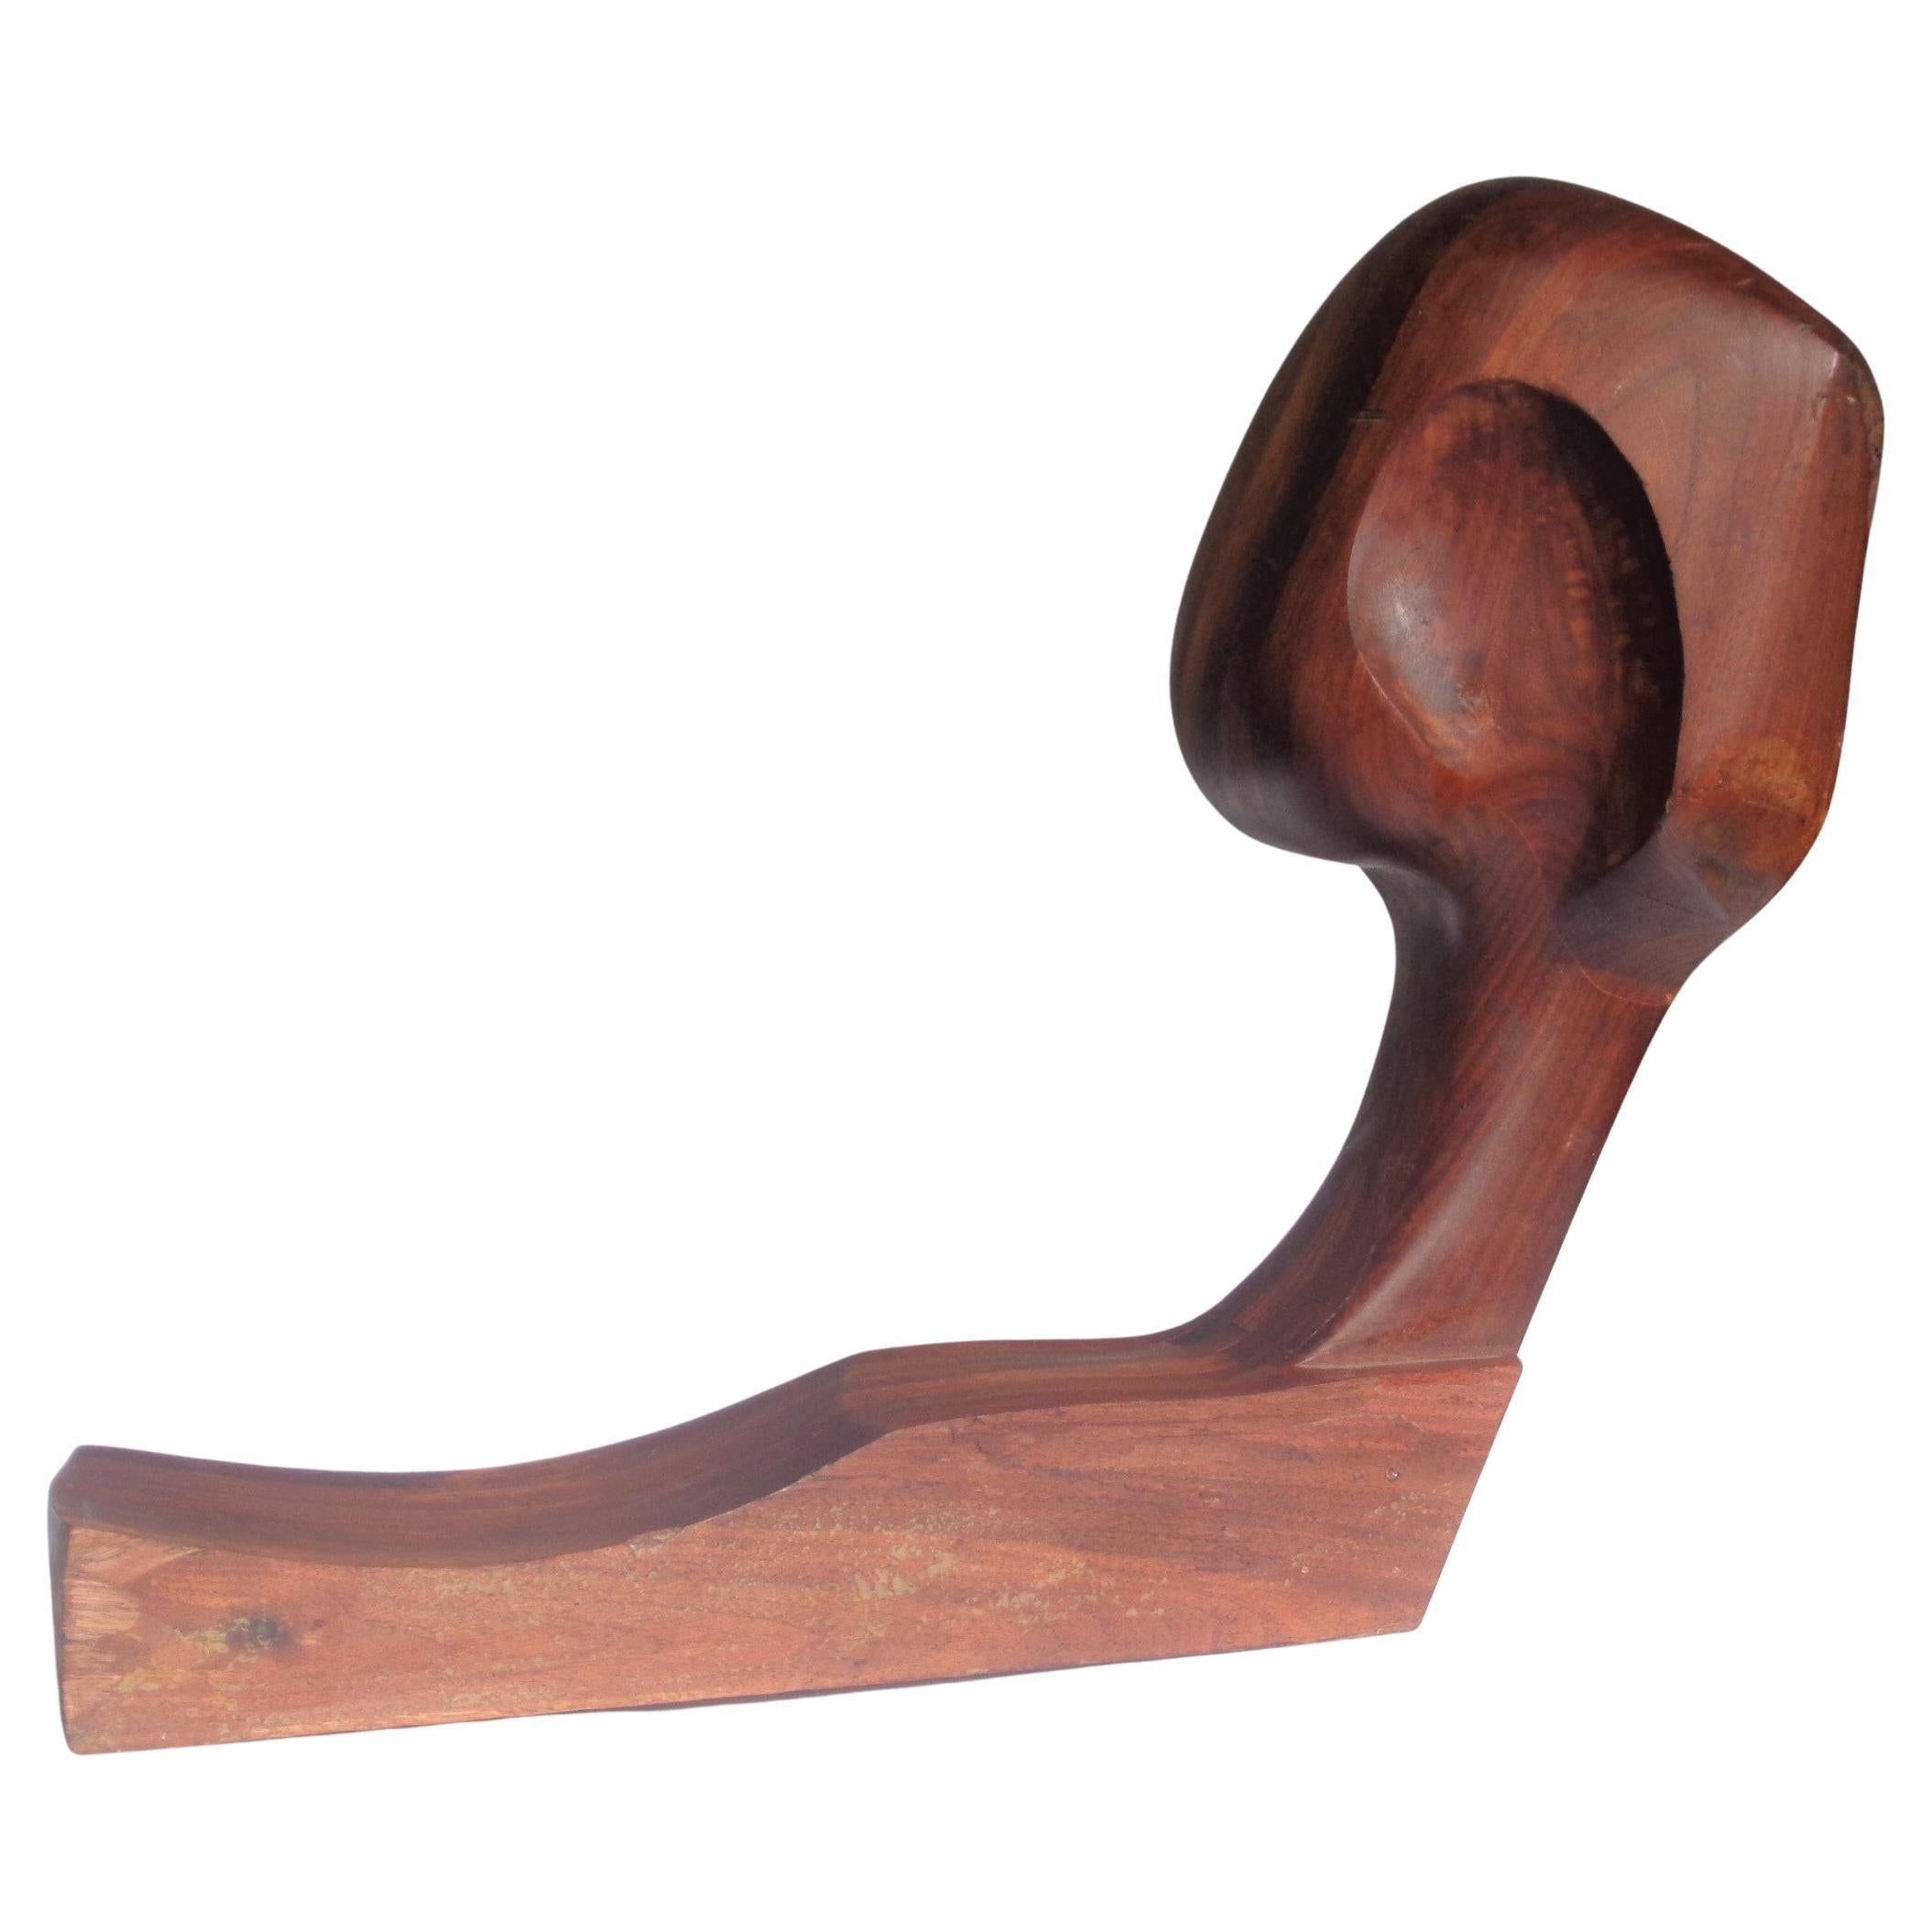 American Studio Craft Movement Abstract Sculpture Wood Bust, 1970-1980 For Sale 4